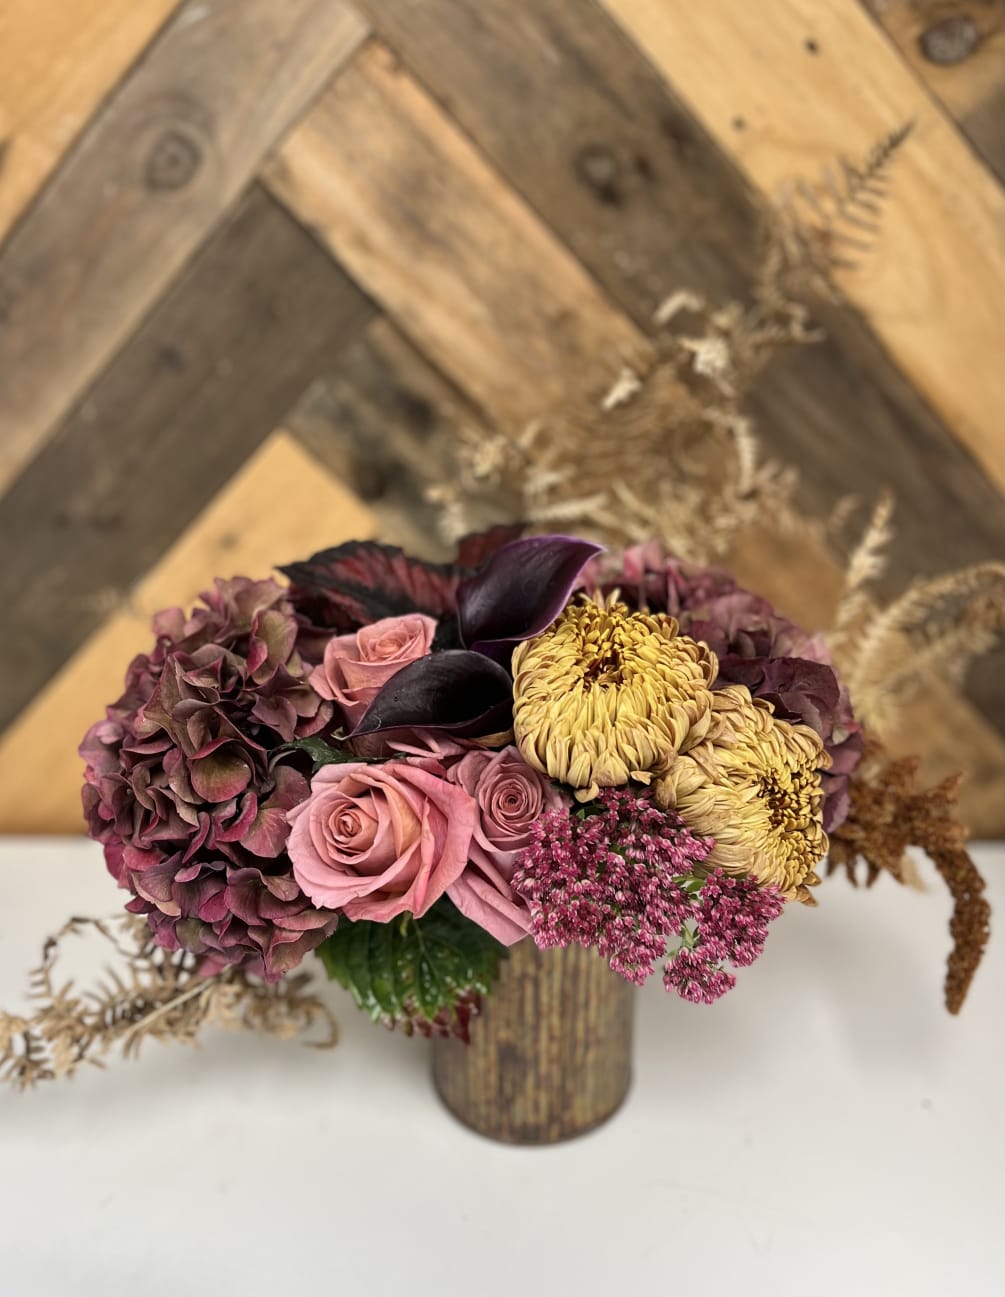 Our Fall Feminine arrangements are designed with moody rich color palettes that